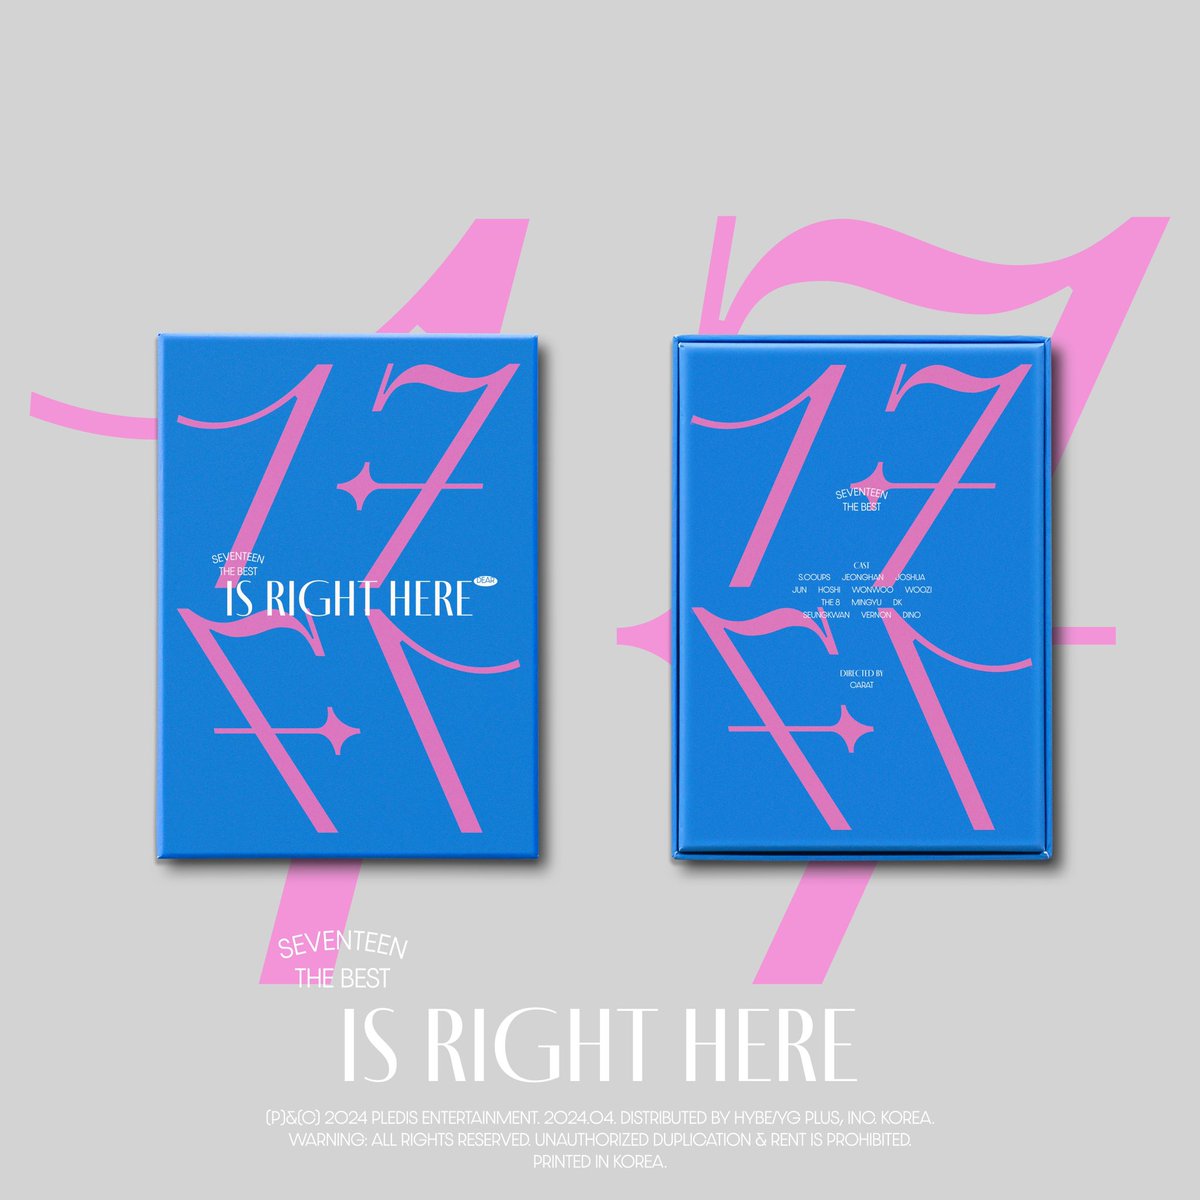 IC WTS LFB PH GO
SEALED SEVENTEEN BEST ALBUM 
🩷17 IS RIGHT HERE🩵 DEAR VER. 

ALBUM ONLY
P600EACH
— 50% DP / 50off for PAYO
✨DOP: APRIL 30 (P300)
✨RB: ONCE ONHAND (P300)
✨MEMBER pooling
✨NETA

Scoups jeonghan joshua jun hoshi wonu woozi the8 mingyu dk seungkwan vernon dino❤️‍🔥